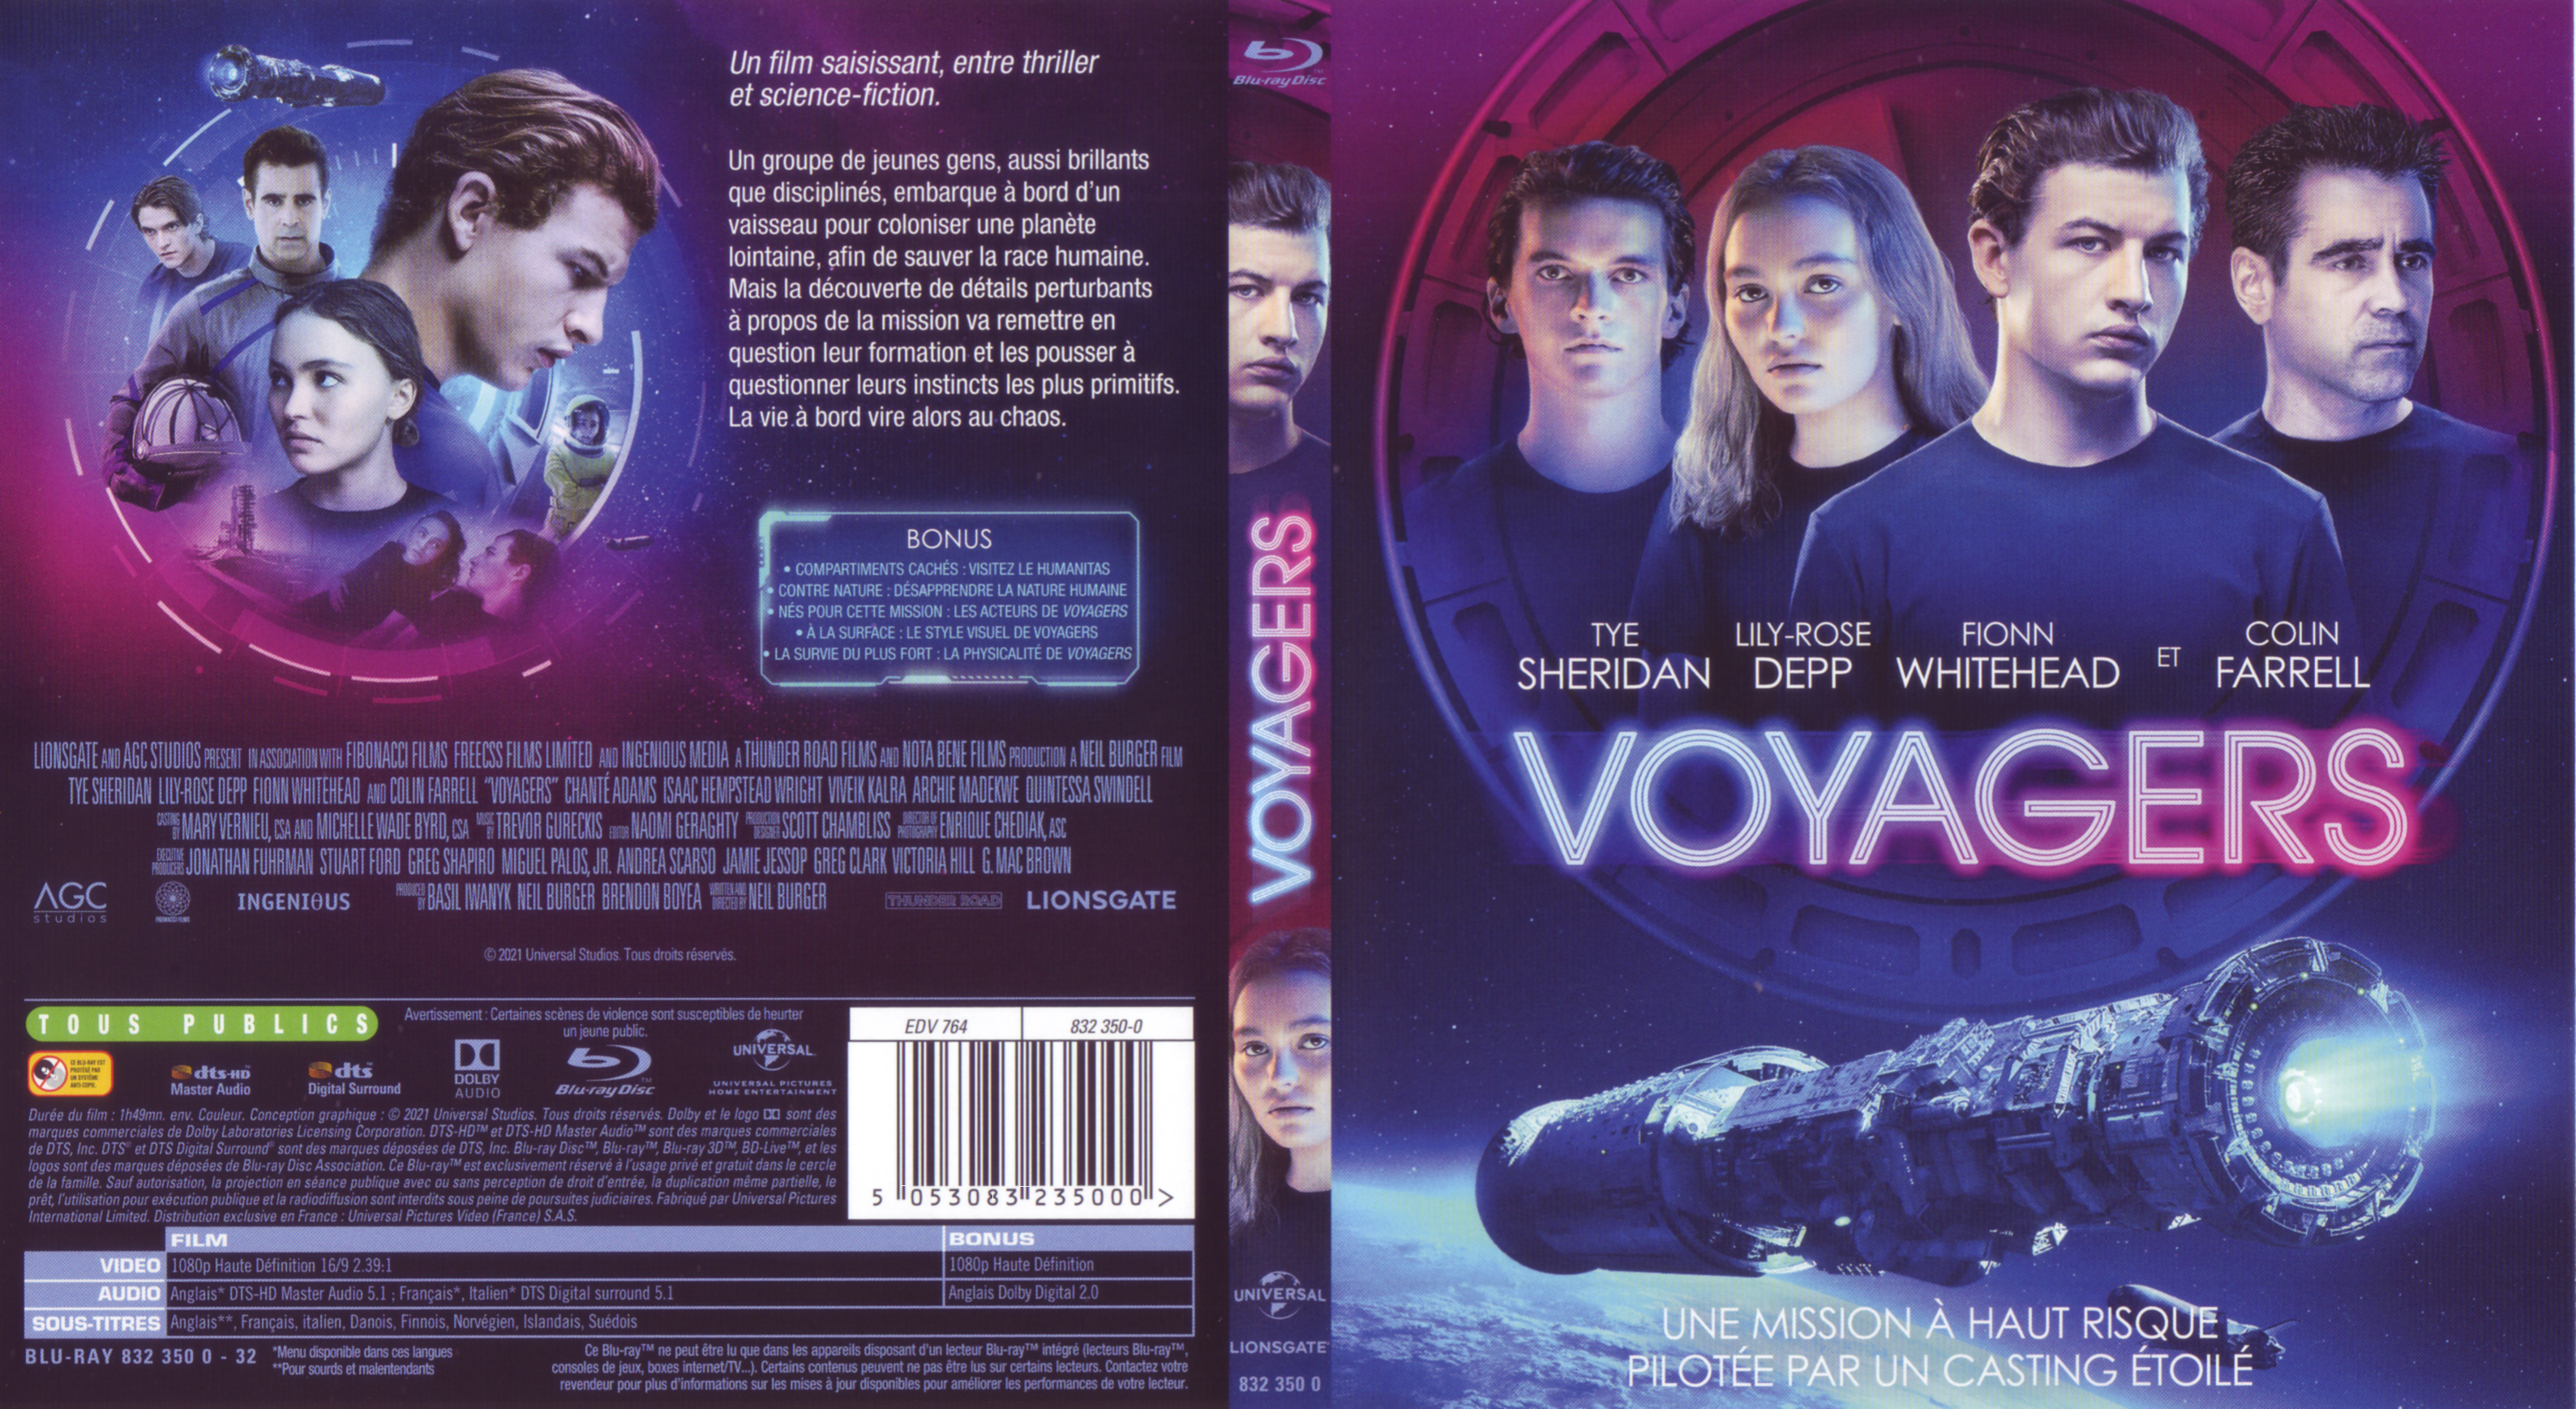 Jaquette DVD Voyagers (BLU-RAY)